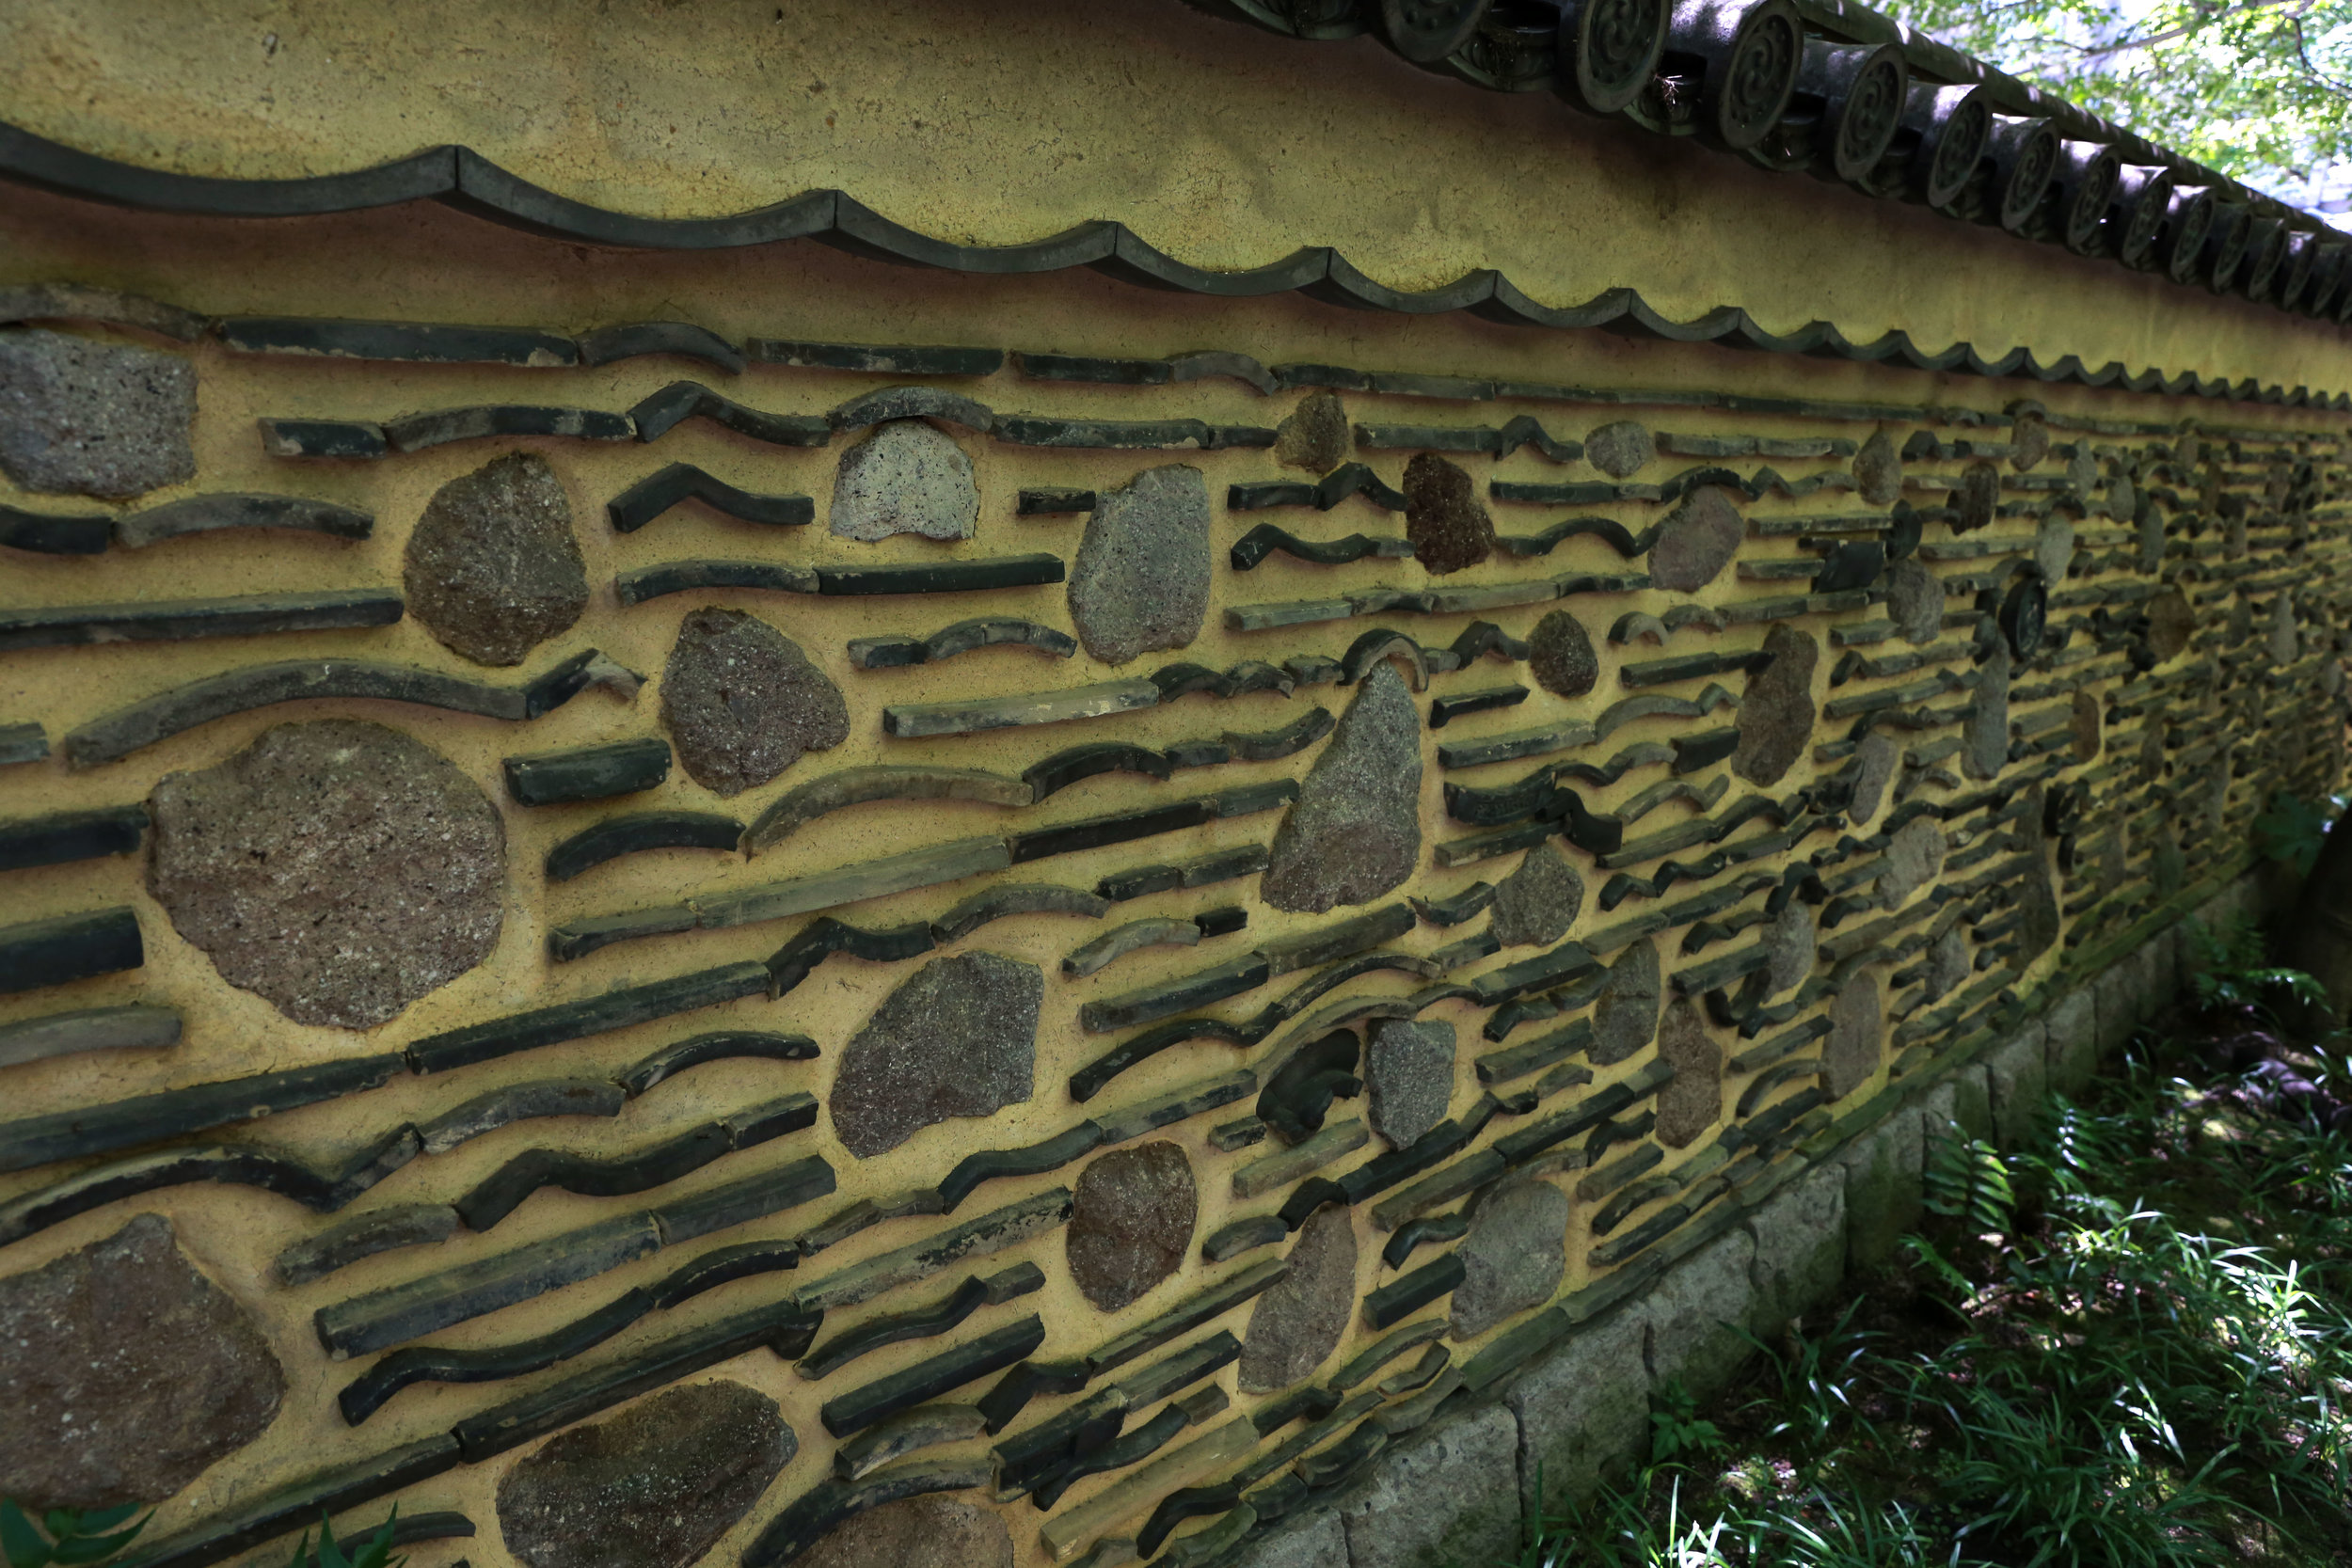  Hakatabei walls surround the Rakusui-en’s garden and tea rooms in Fukuoka, Japan, June 22, 2018. The Rakusui-en’s hakatabei wall dates back to the Sengoku period and is made up of recycled tiles, rocks, and dirt. 